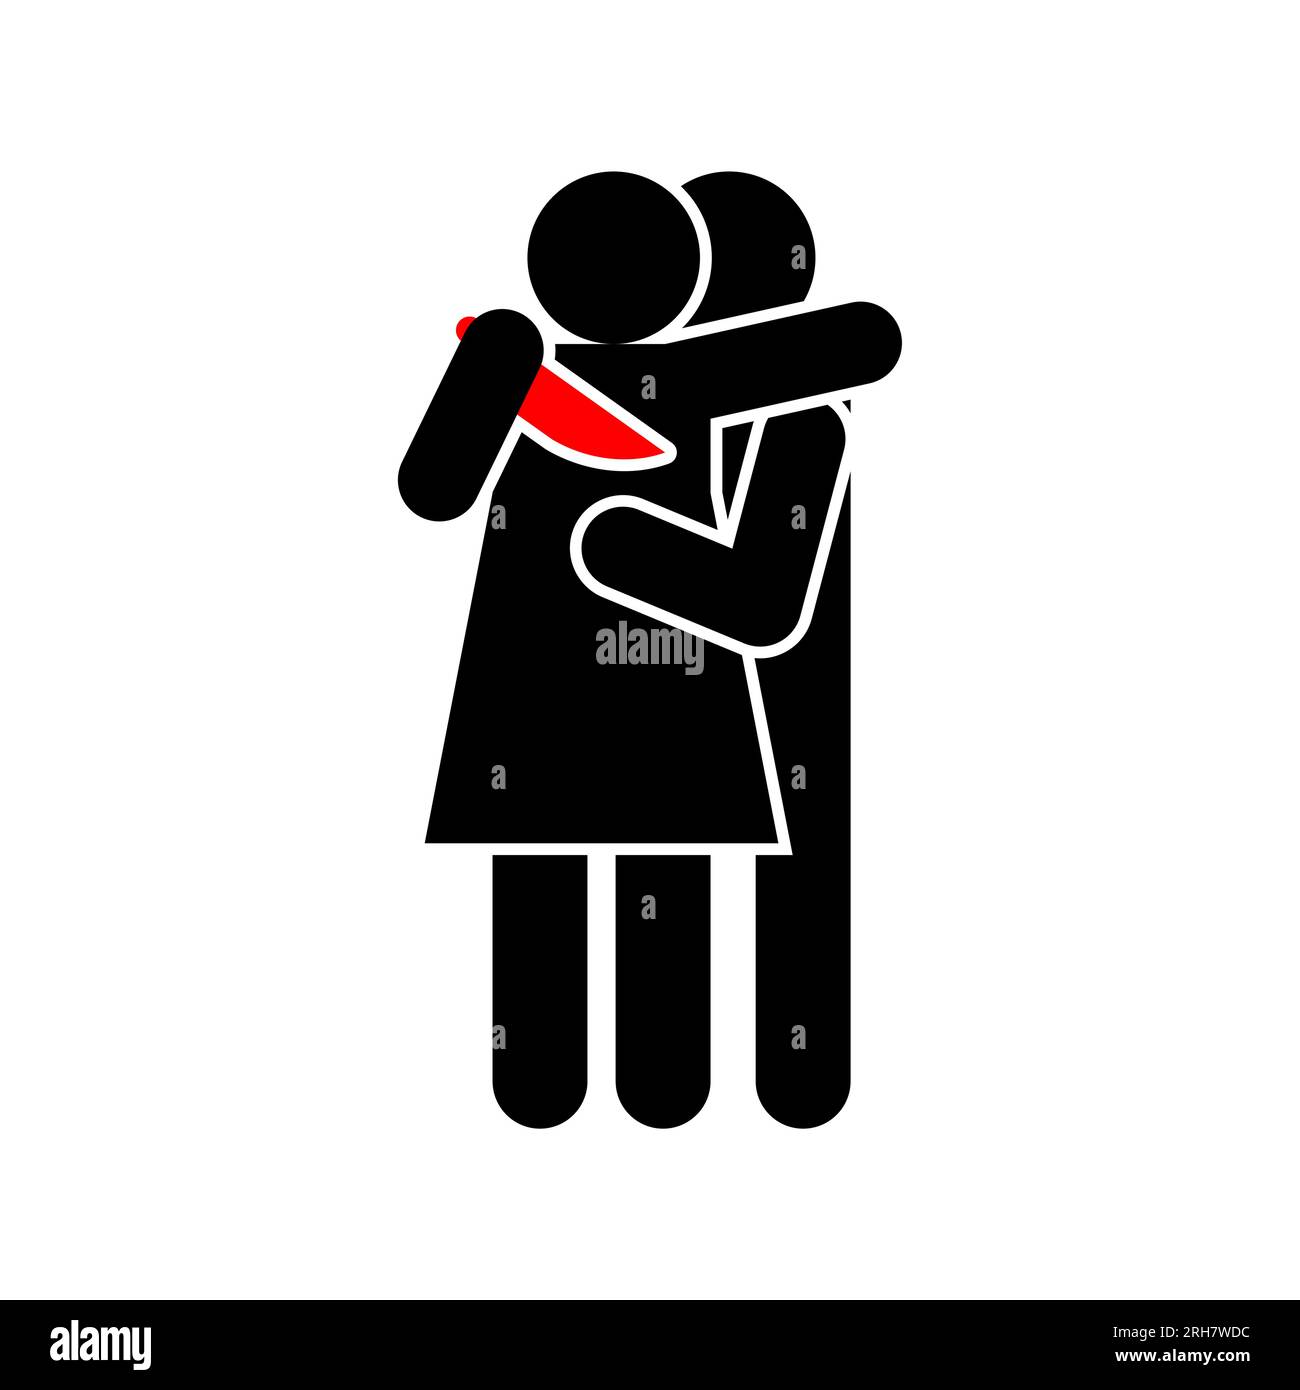 Changing husband. guy betrayed. Man traitor with knife. Concept of sticking a knife in wife's back. Stock Vector